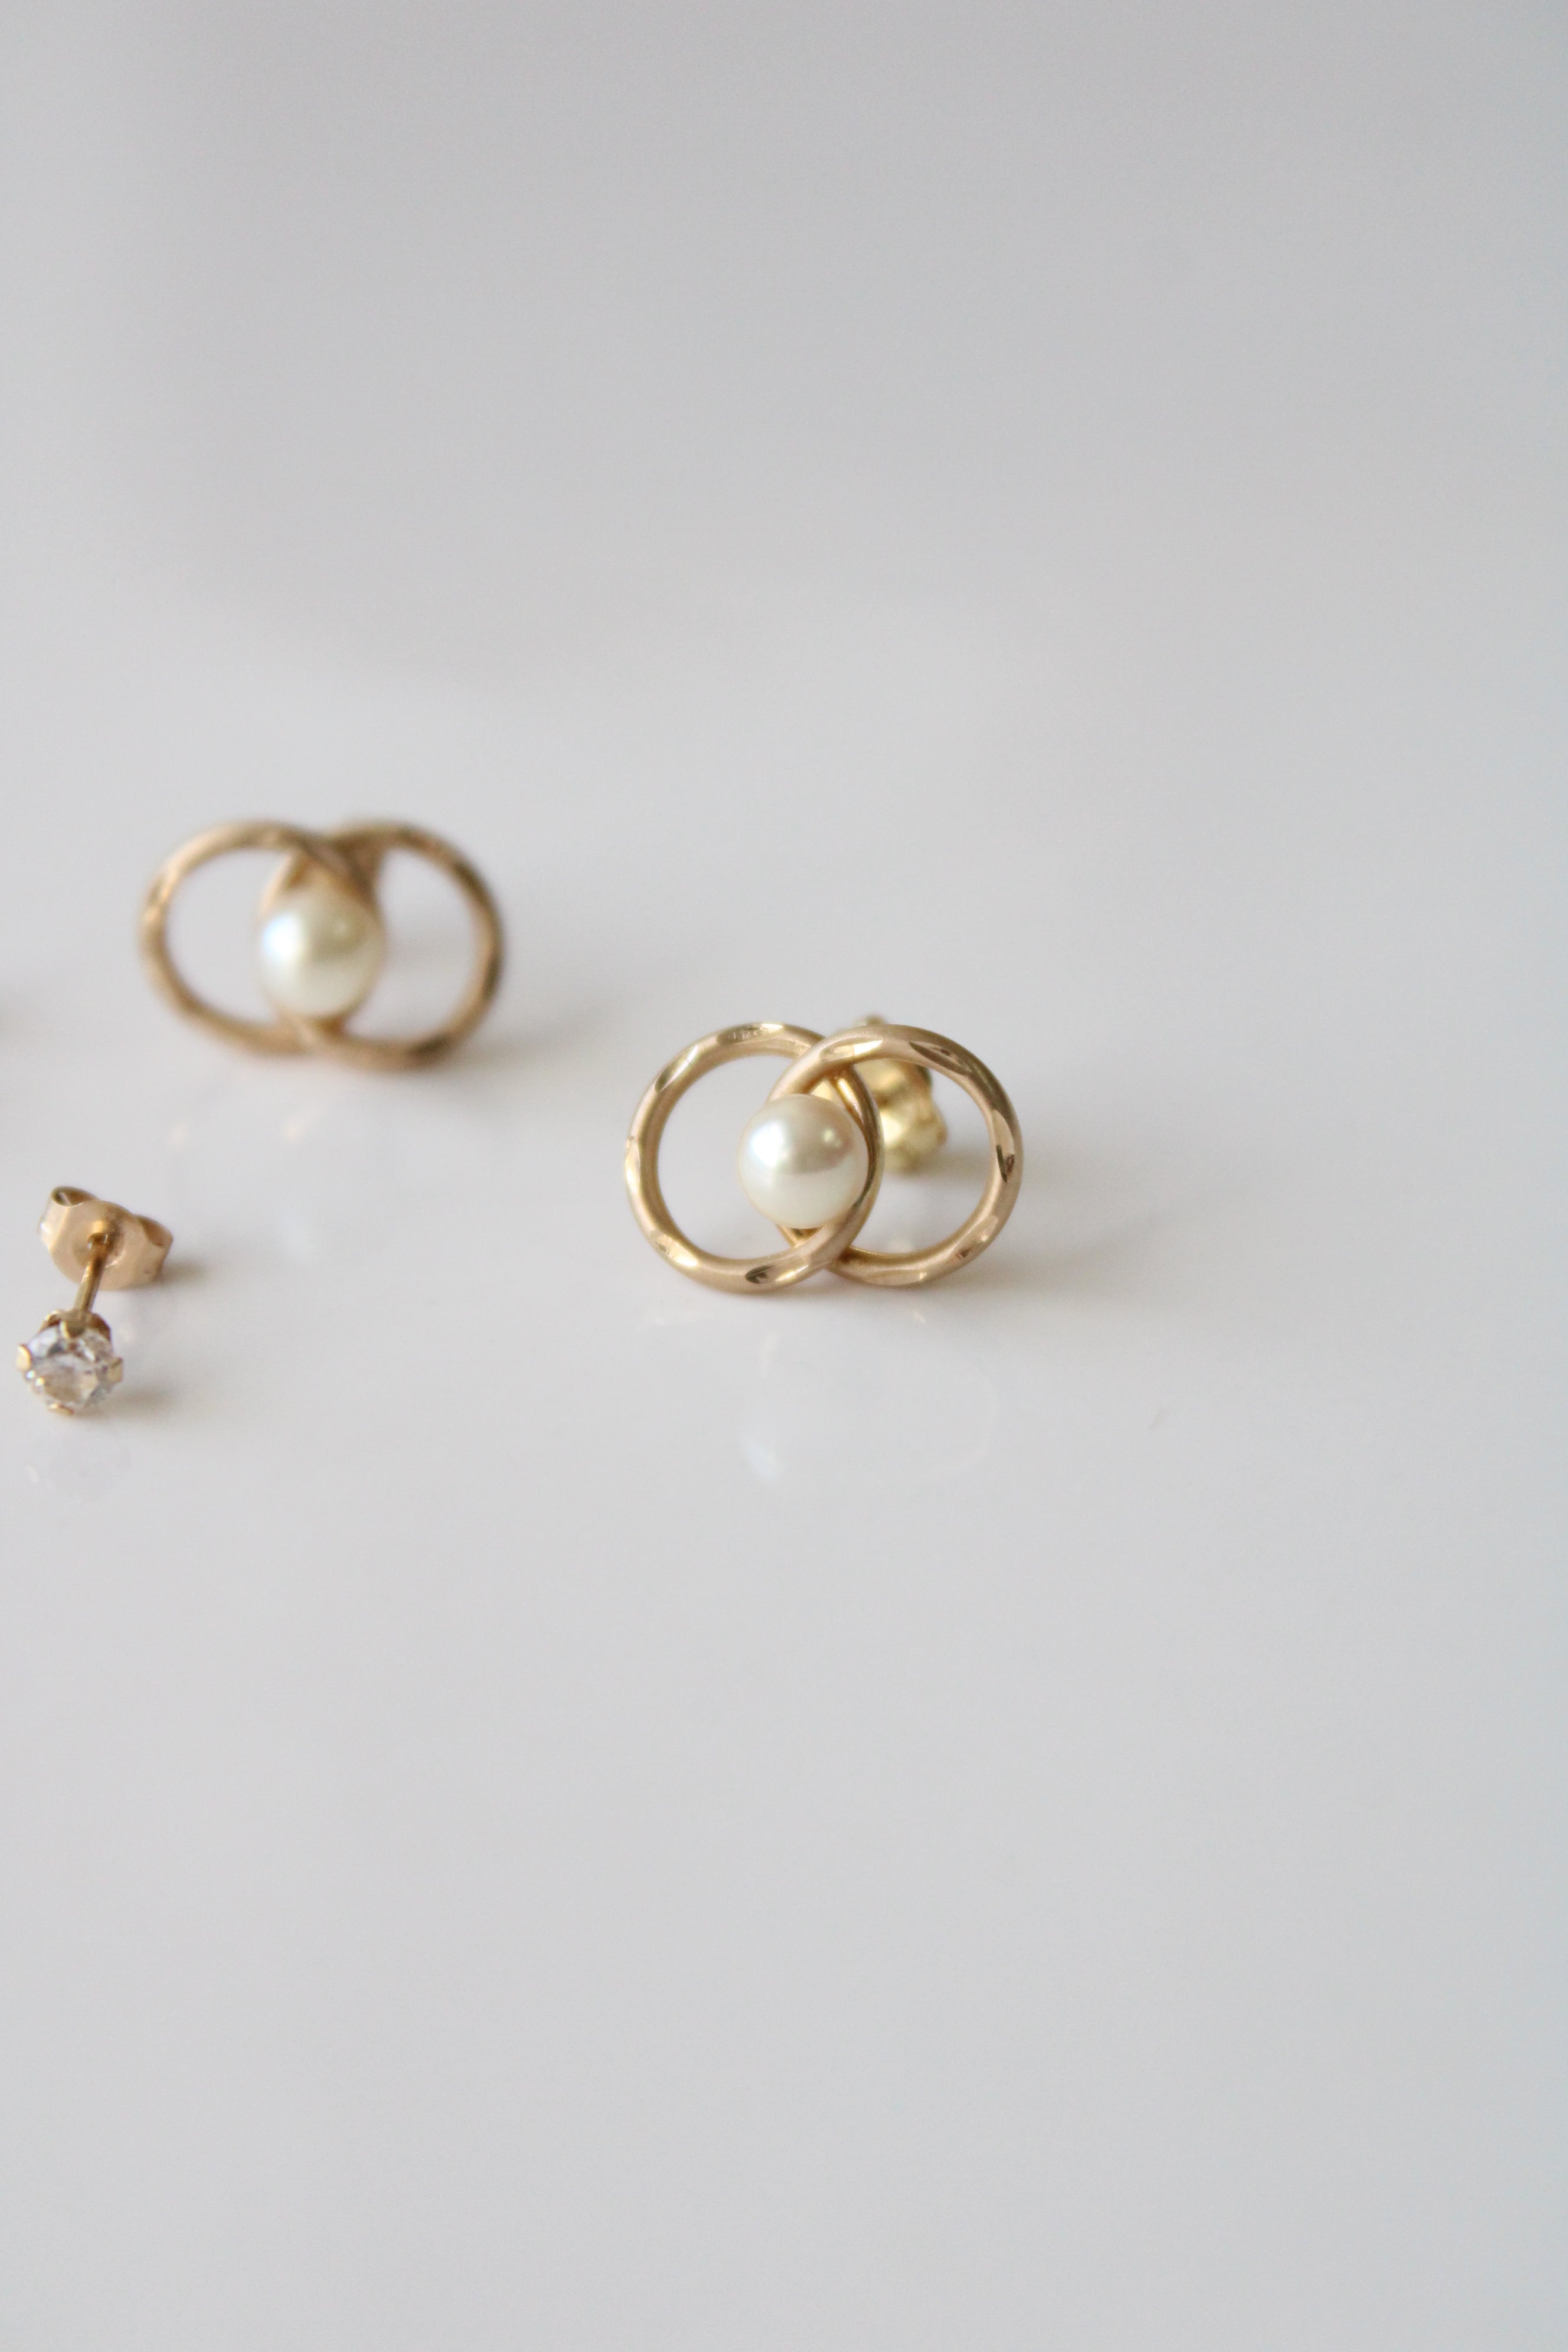 14KT Yellow Gold Genuine Pearl & Clear Stone Stud Earrings | Set Of 2